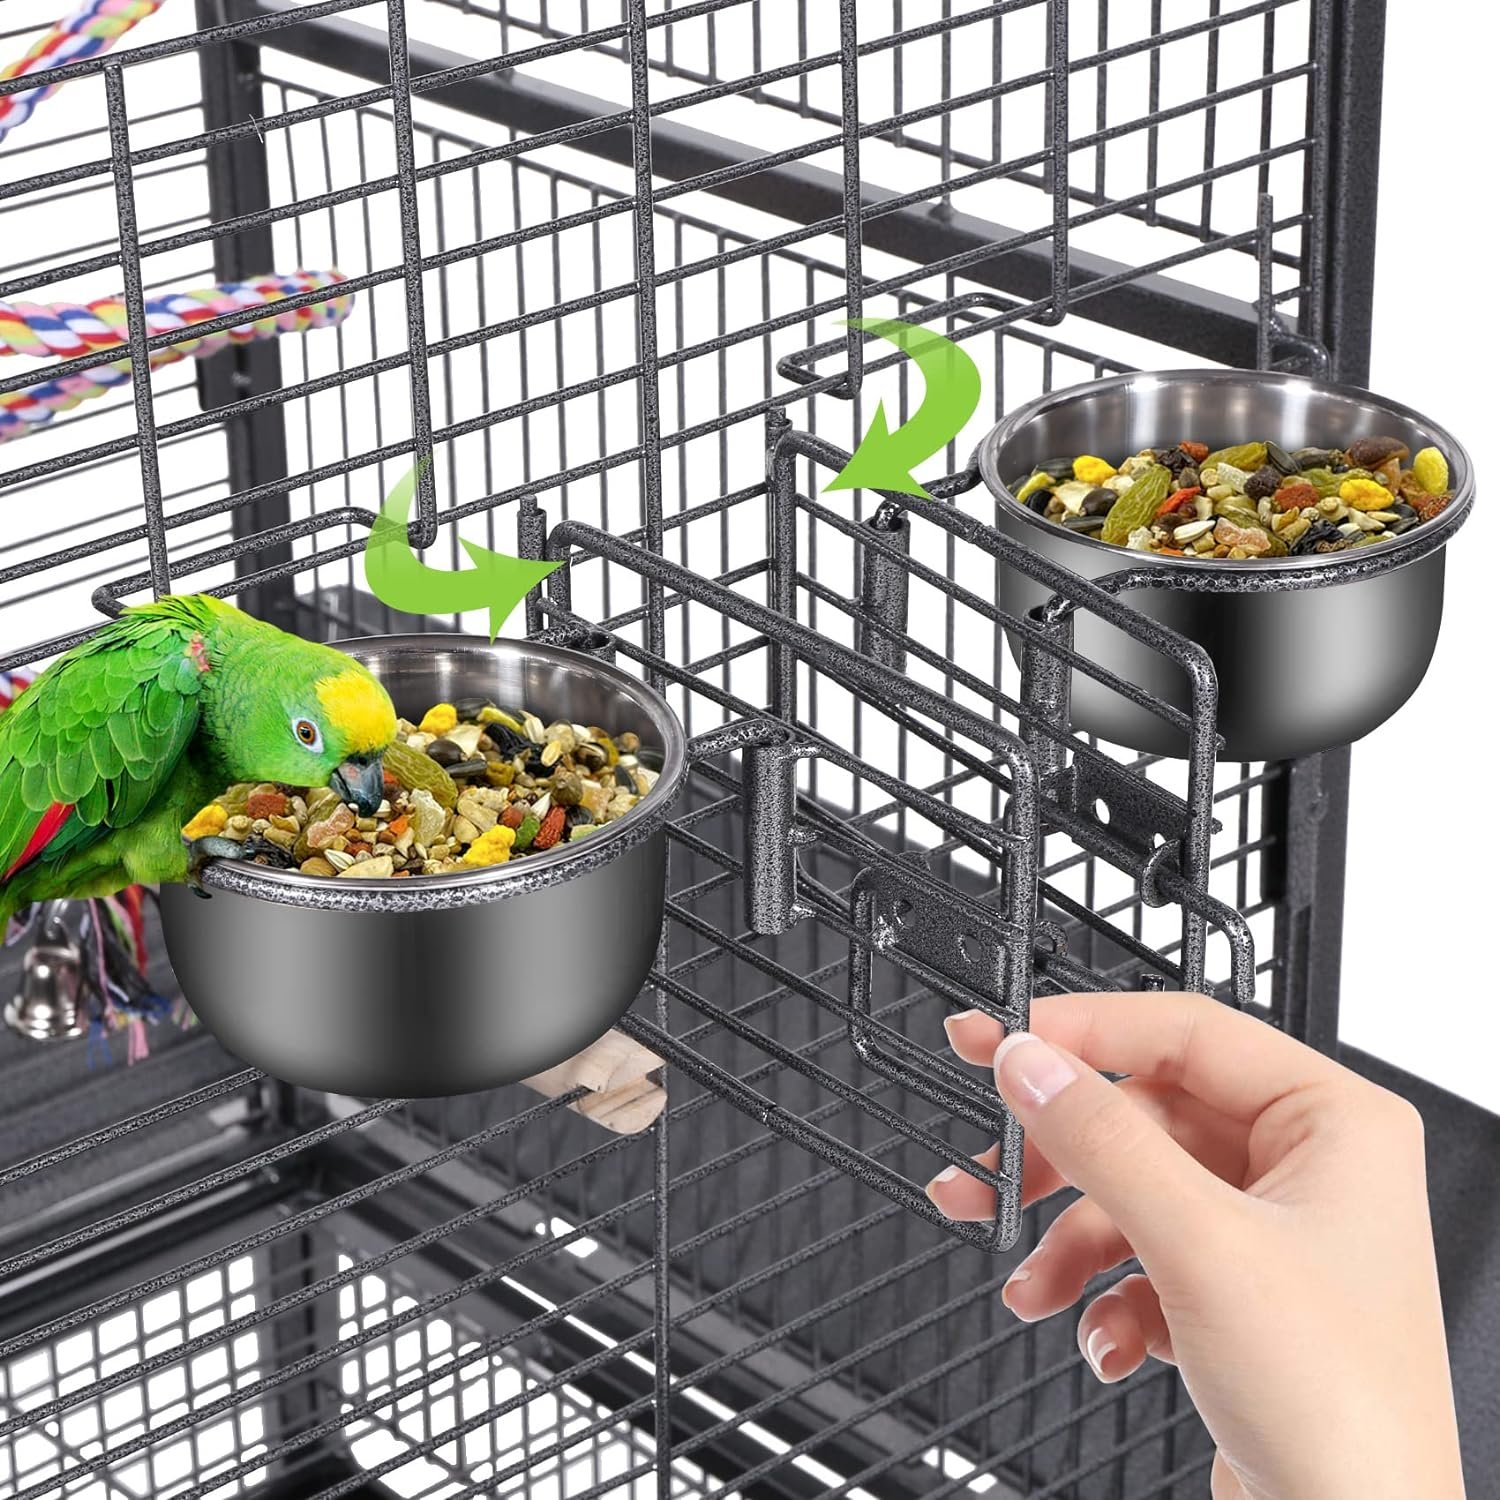 61 Bird Cage, Large Bird Flight Cages Aviary with Rolling Stand Bottom Tray, Wrought Iron Birdcage with PlayTop Rope Bungee Bird Toy for Parakeet, Parrot, Lovebirds, Pigeons, Cockatiels, Macaw